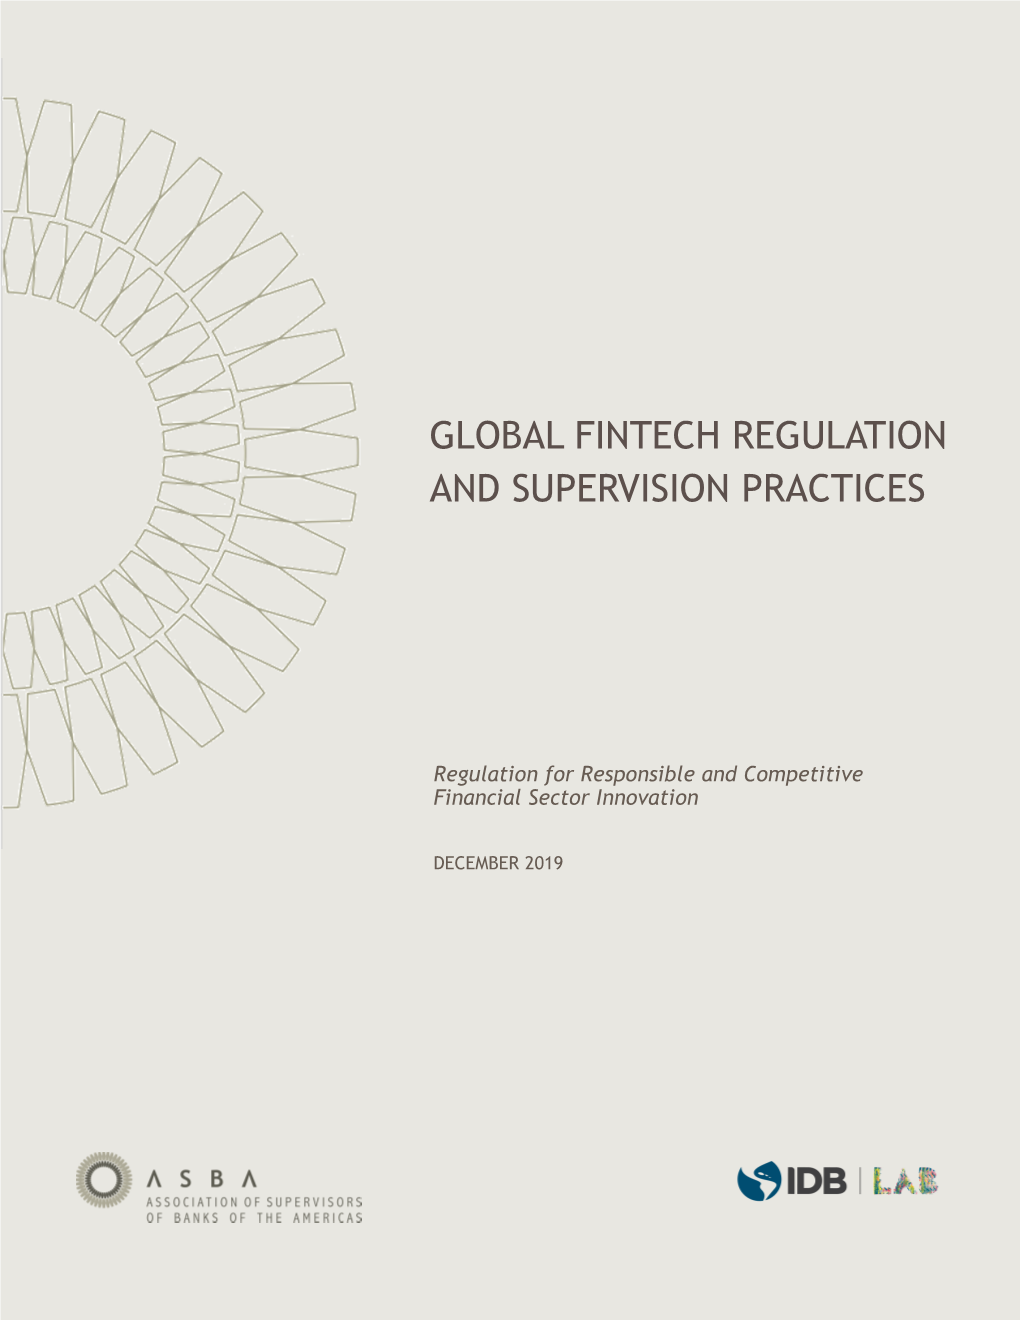 Global Fintech Regulation and Supervision Practices